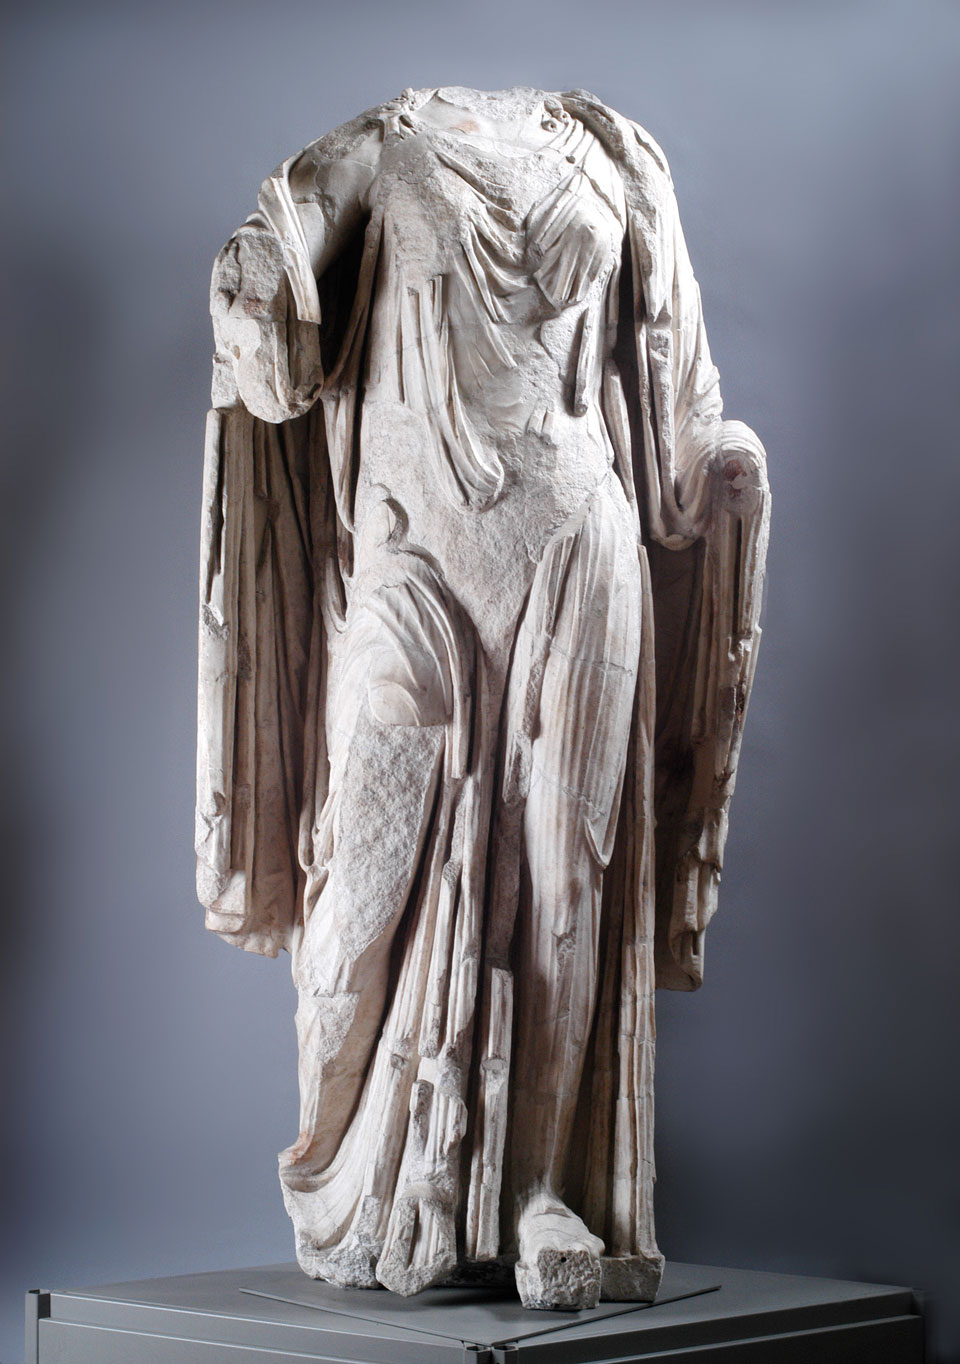 Berga theatre, statue attributed to Agrippina the Younger, Julio-Claudian dynasty, mid 1st century A.D. (Archive of the Vicenza Natural history and Archaelogical Museum)